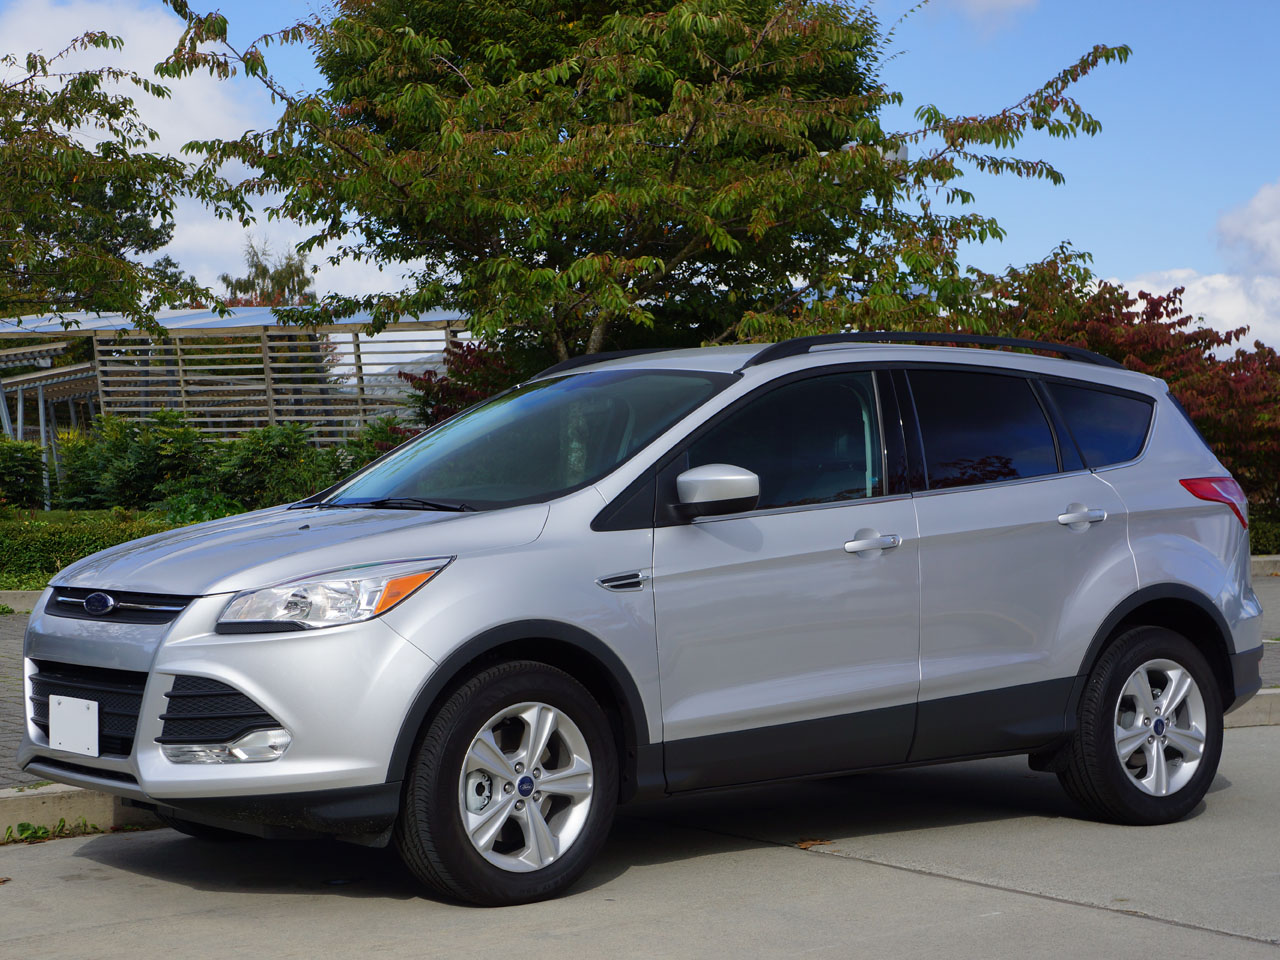 Ford escape road test review #9